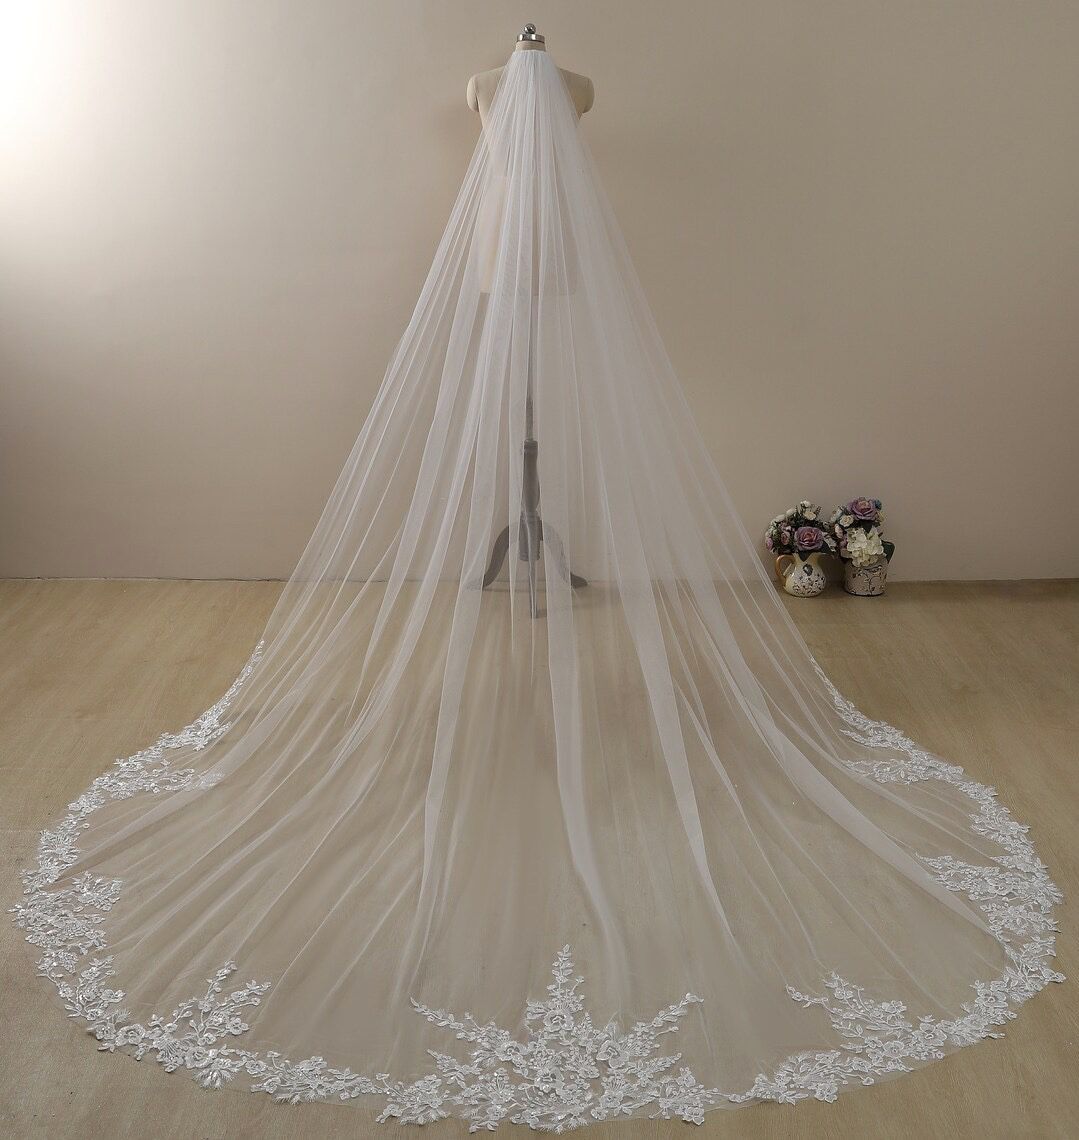 Flowery Wedding Cathedral Veil - 104" Soft Light Ivory Tulle with Lace Appliqué 